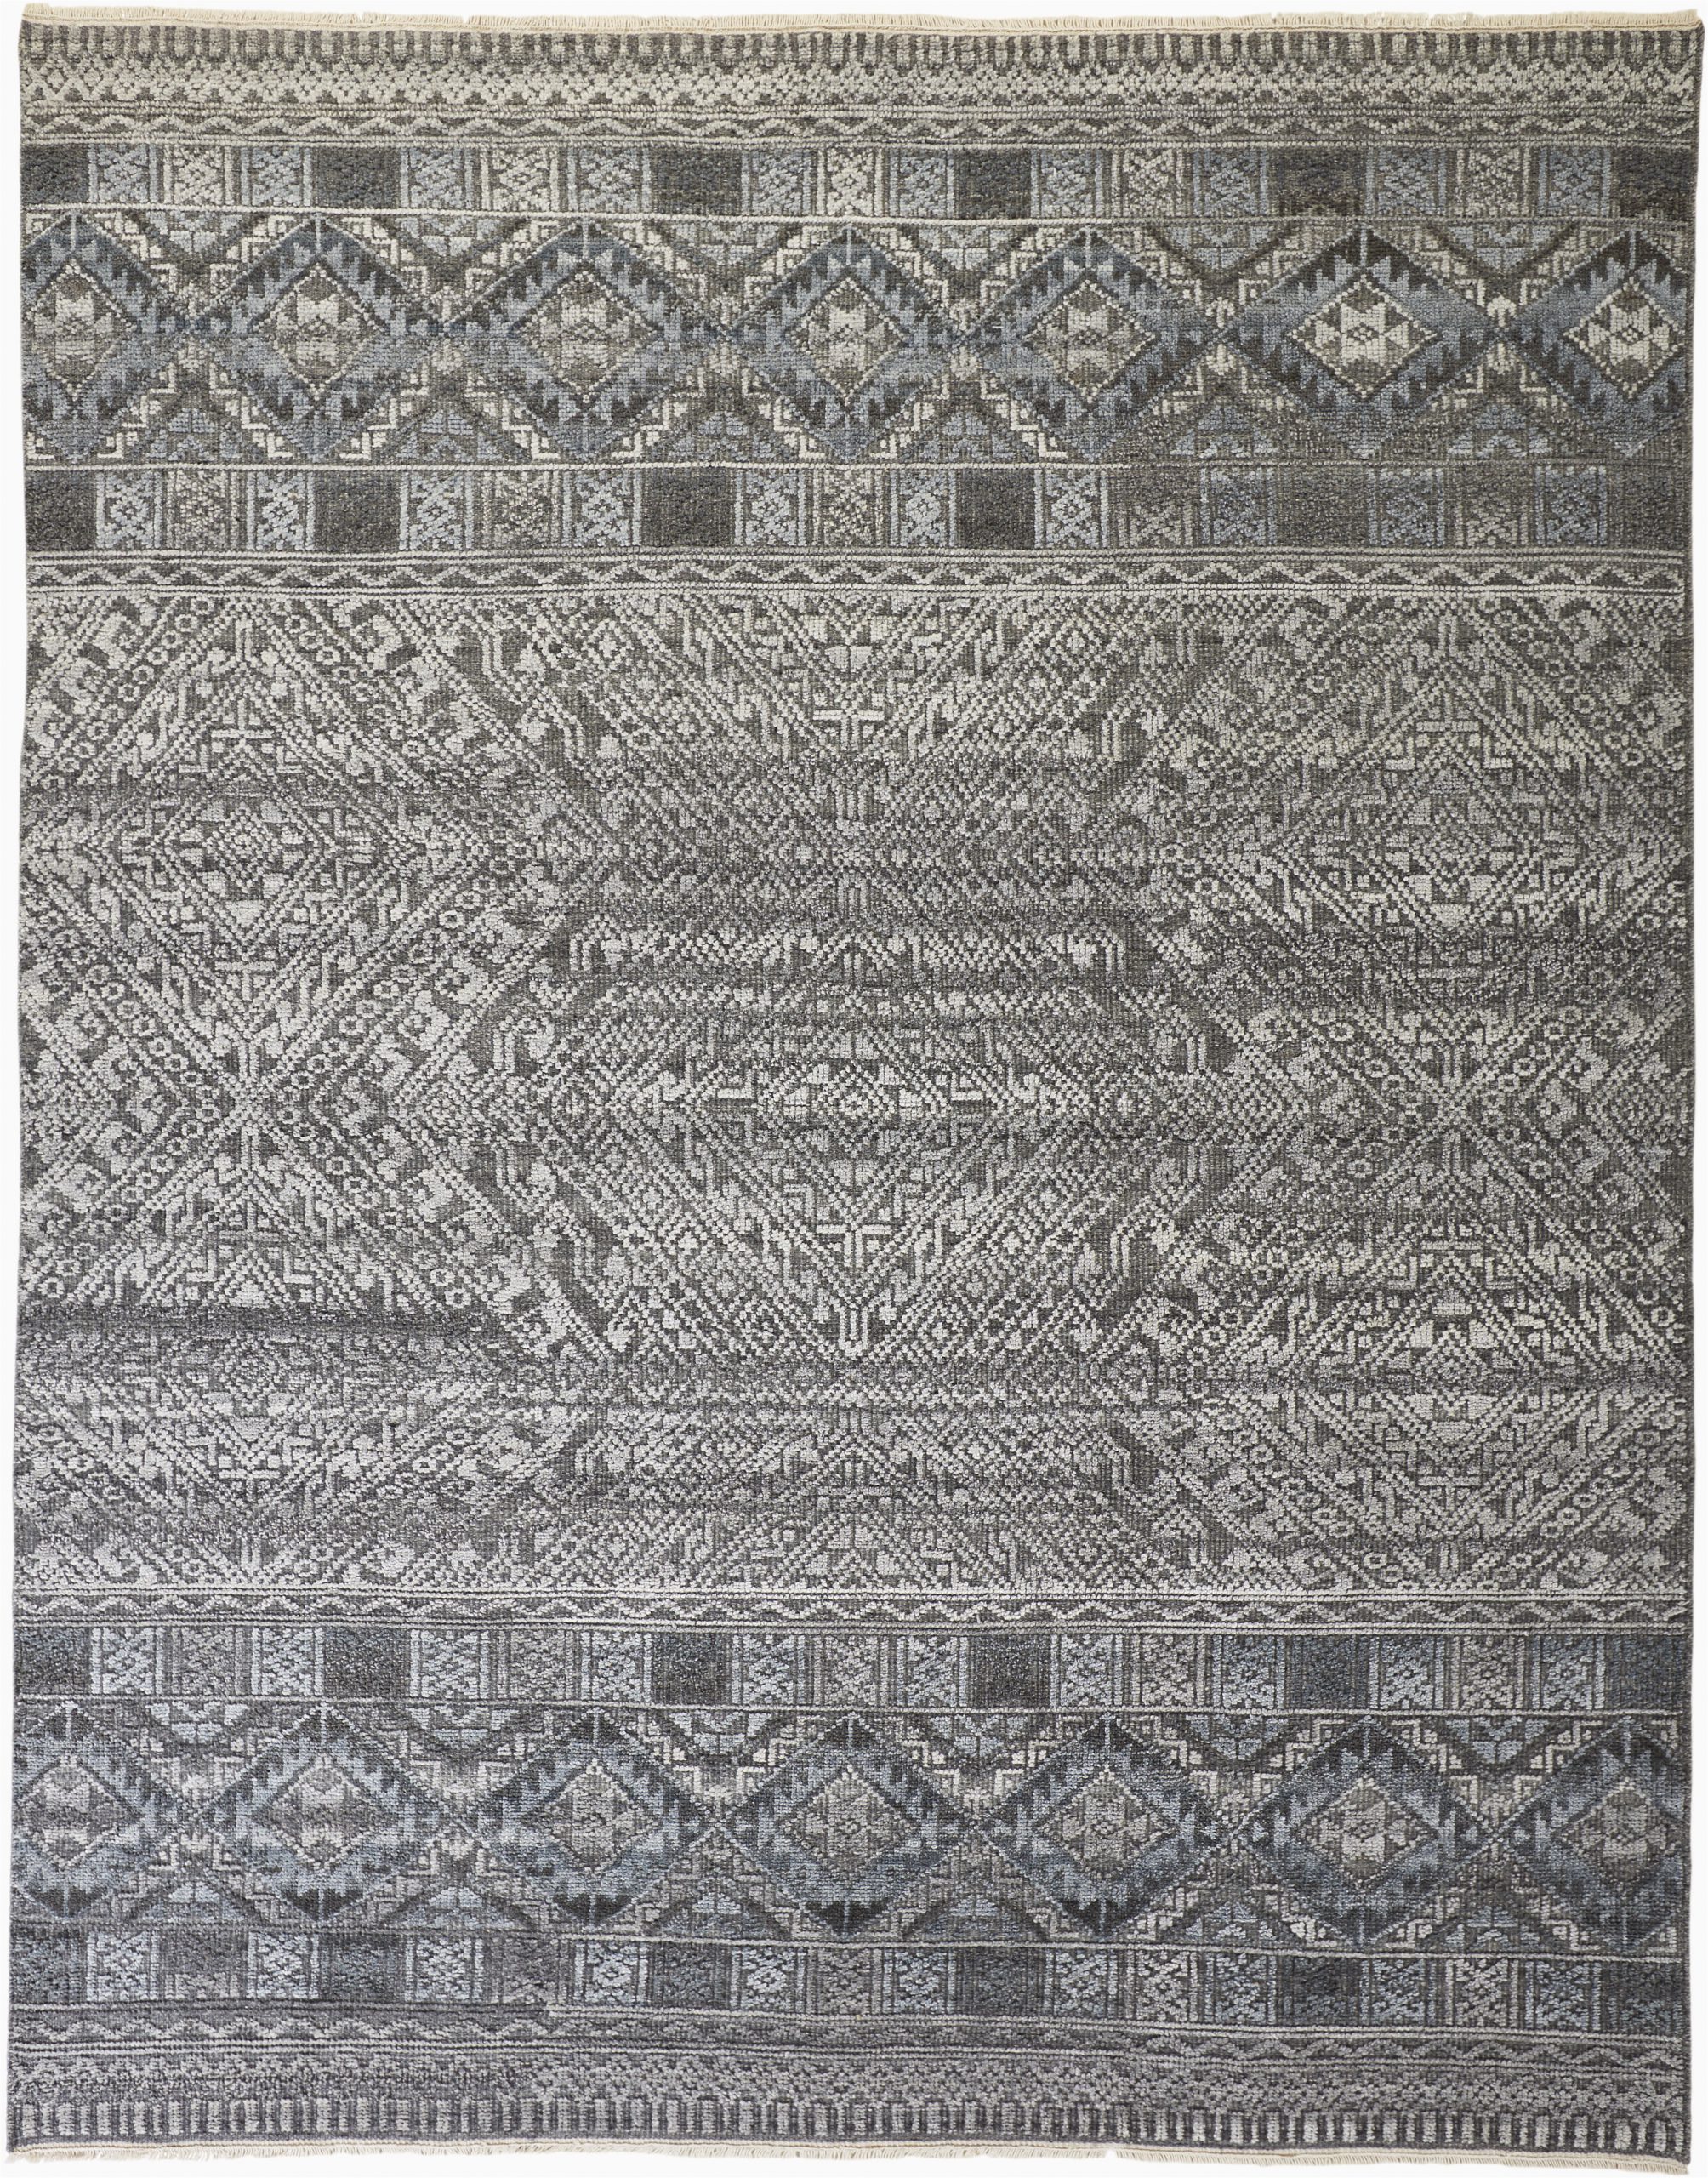 Area Rugs at Ross Dress for Less Kylee Hand Knotted Cotton Wool Gray area Rug